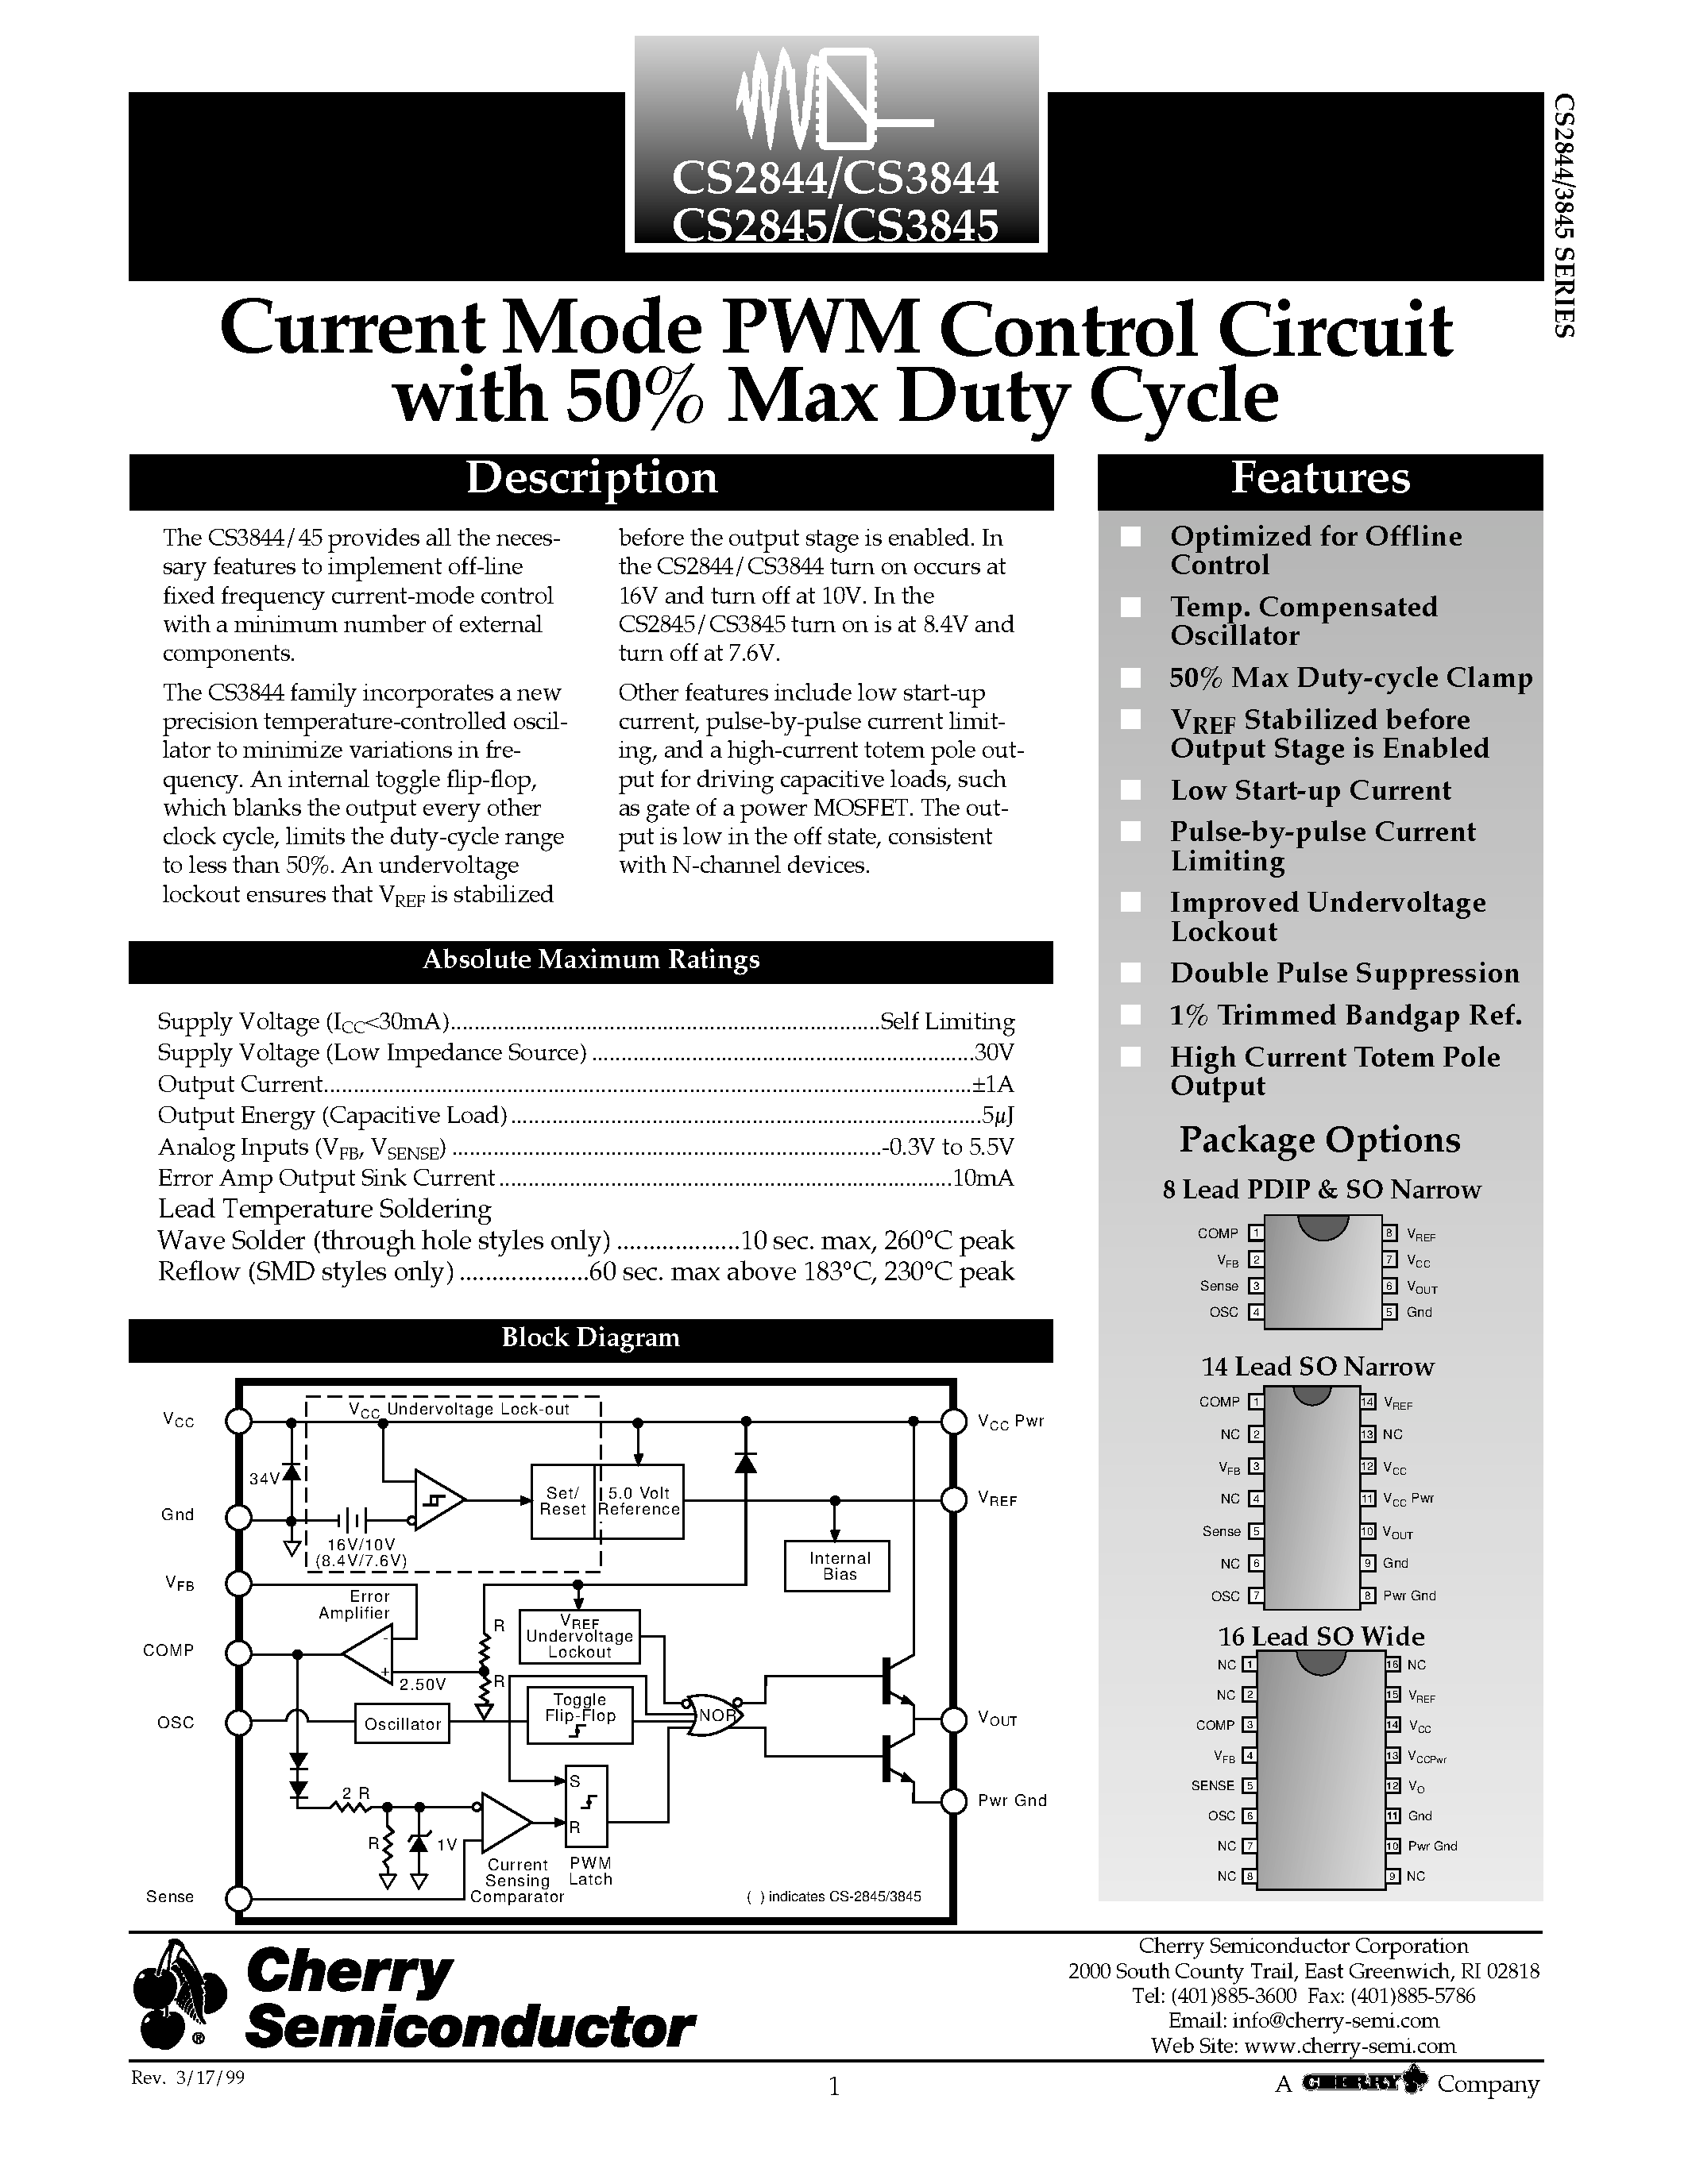 Datasheet CS2845LDWR16 - Current Mode PWM Control Circuit with 50% Max Duty Cycle page 1